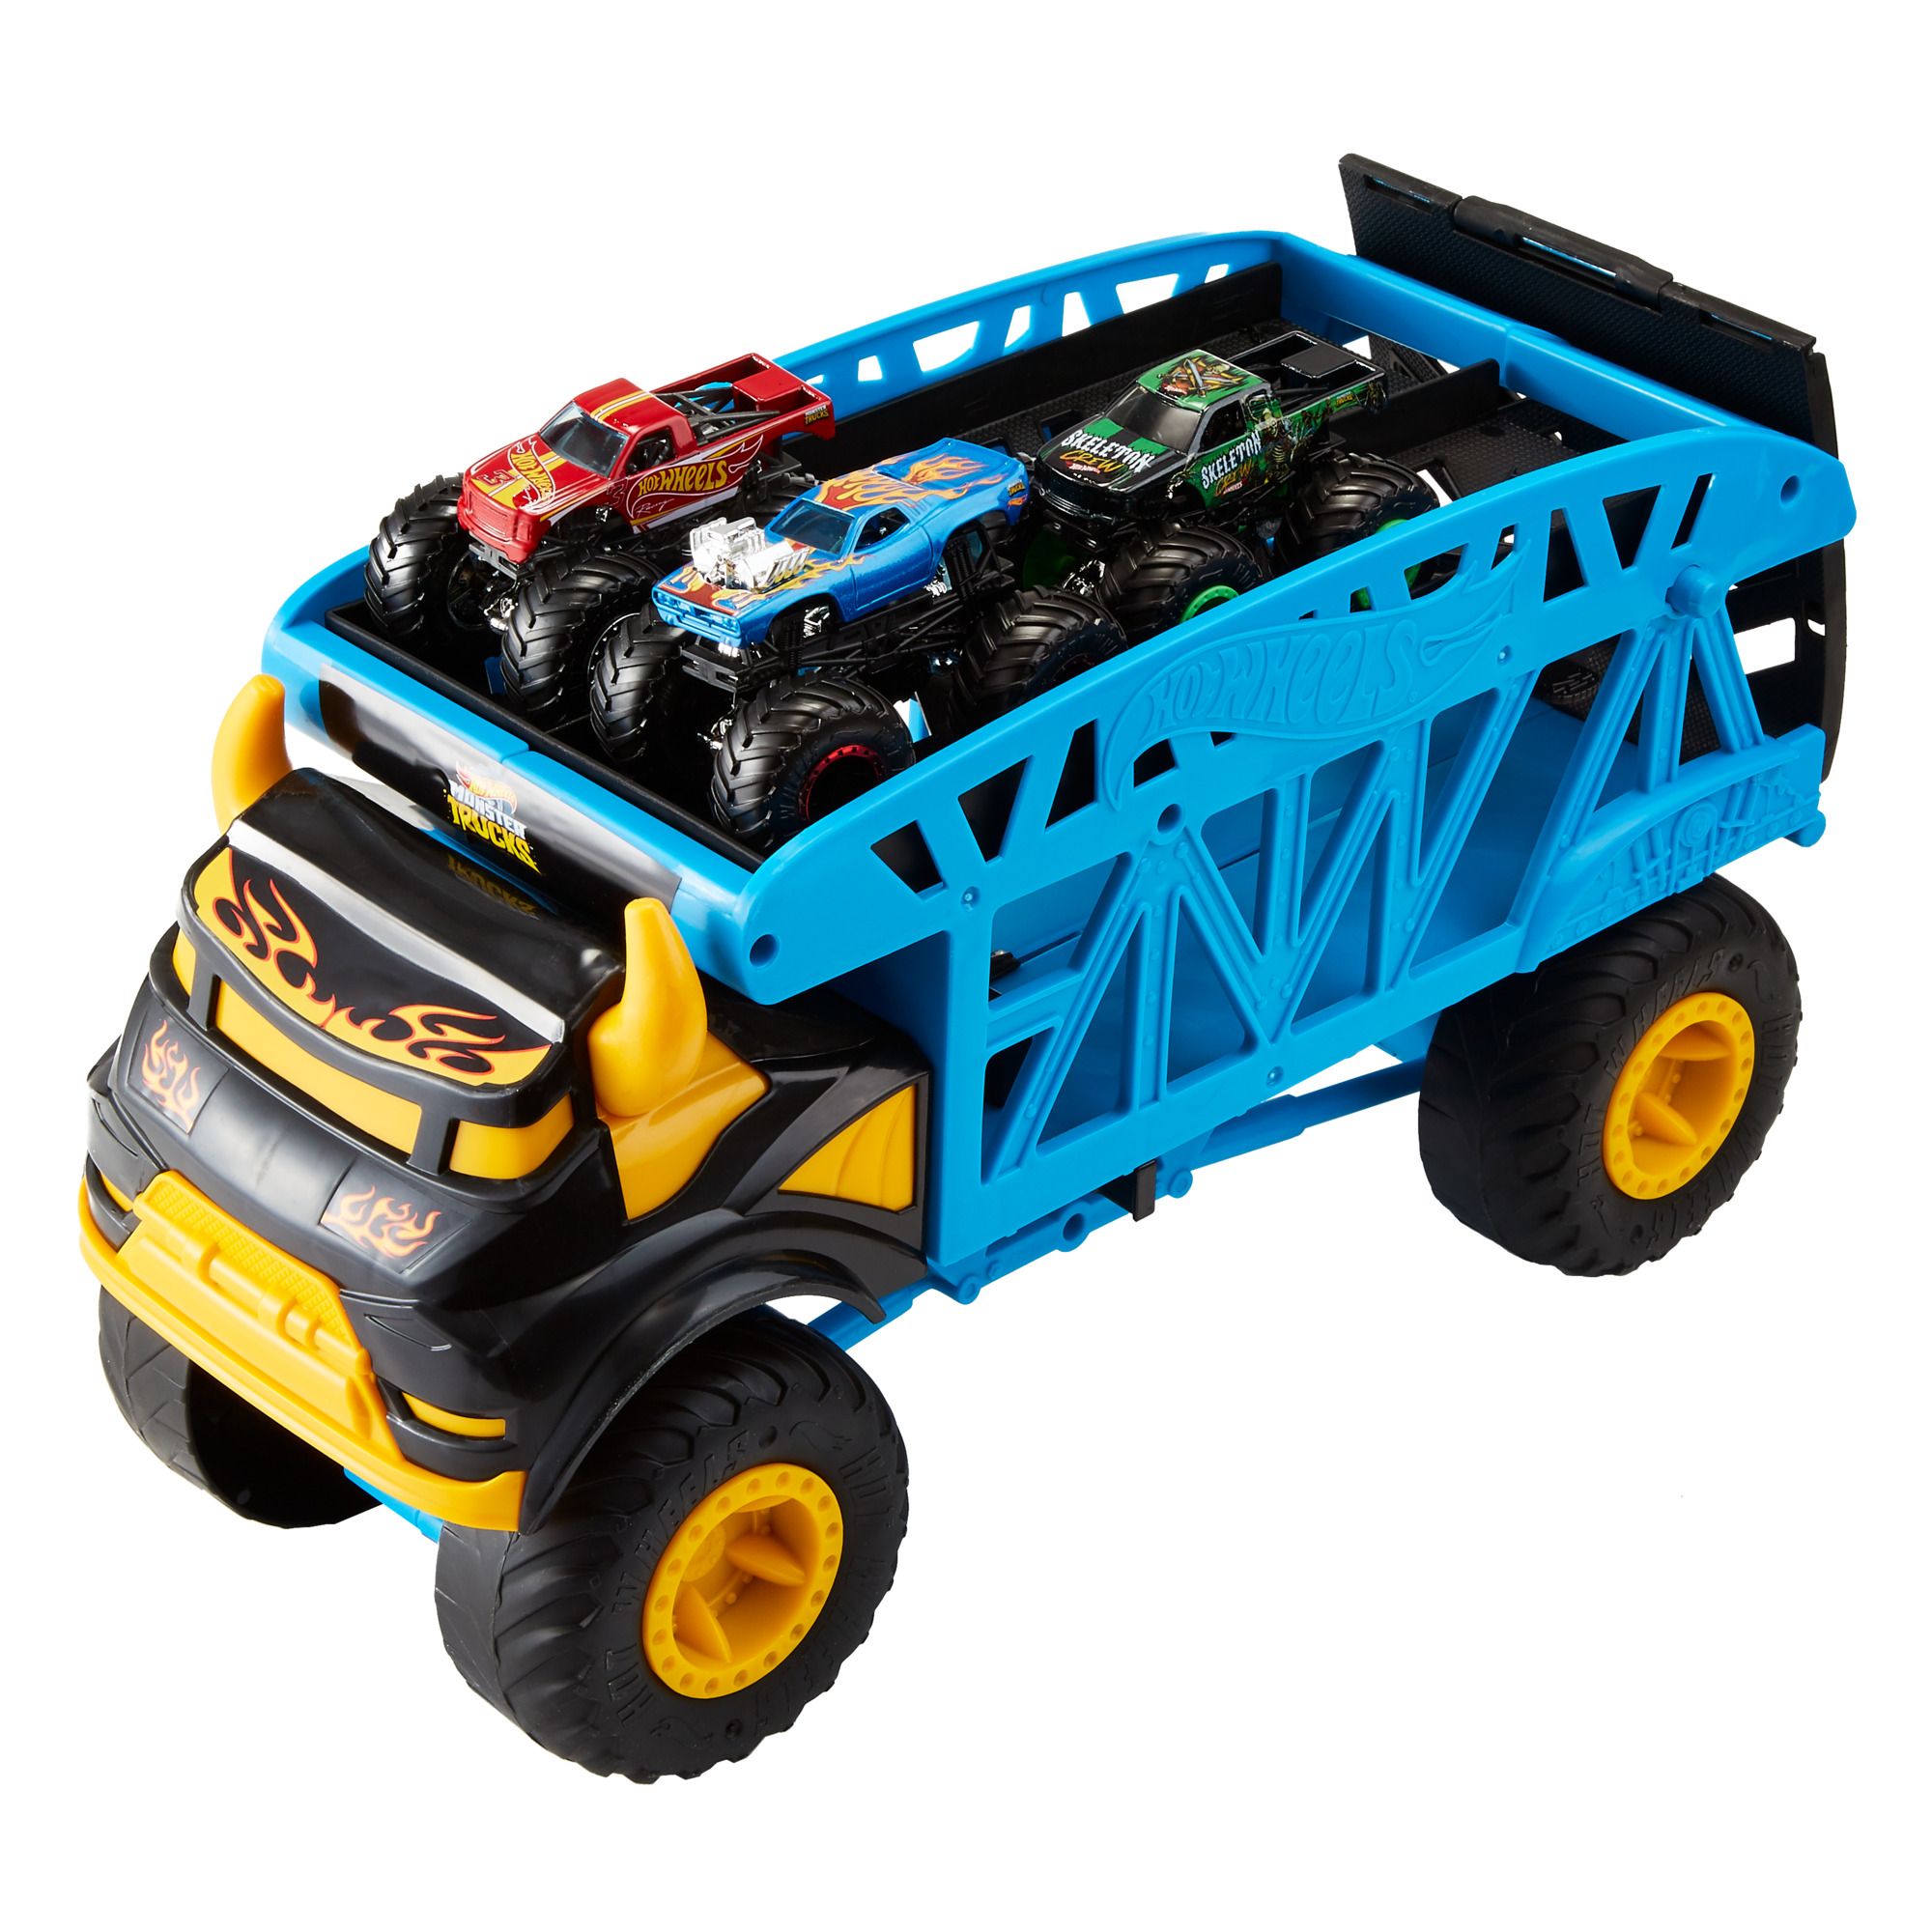 Hot Wheels Monster Trucks Monster Mover, Gift Idea for Kids Ages 3 Years  Old & Up